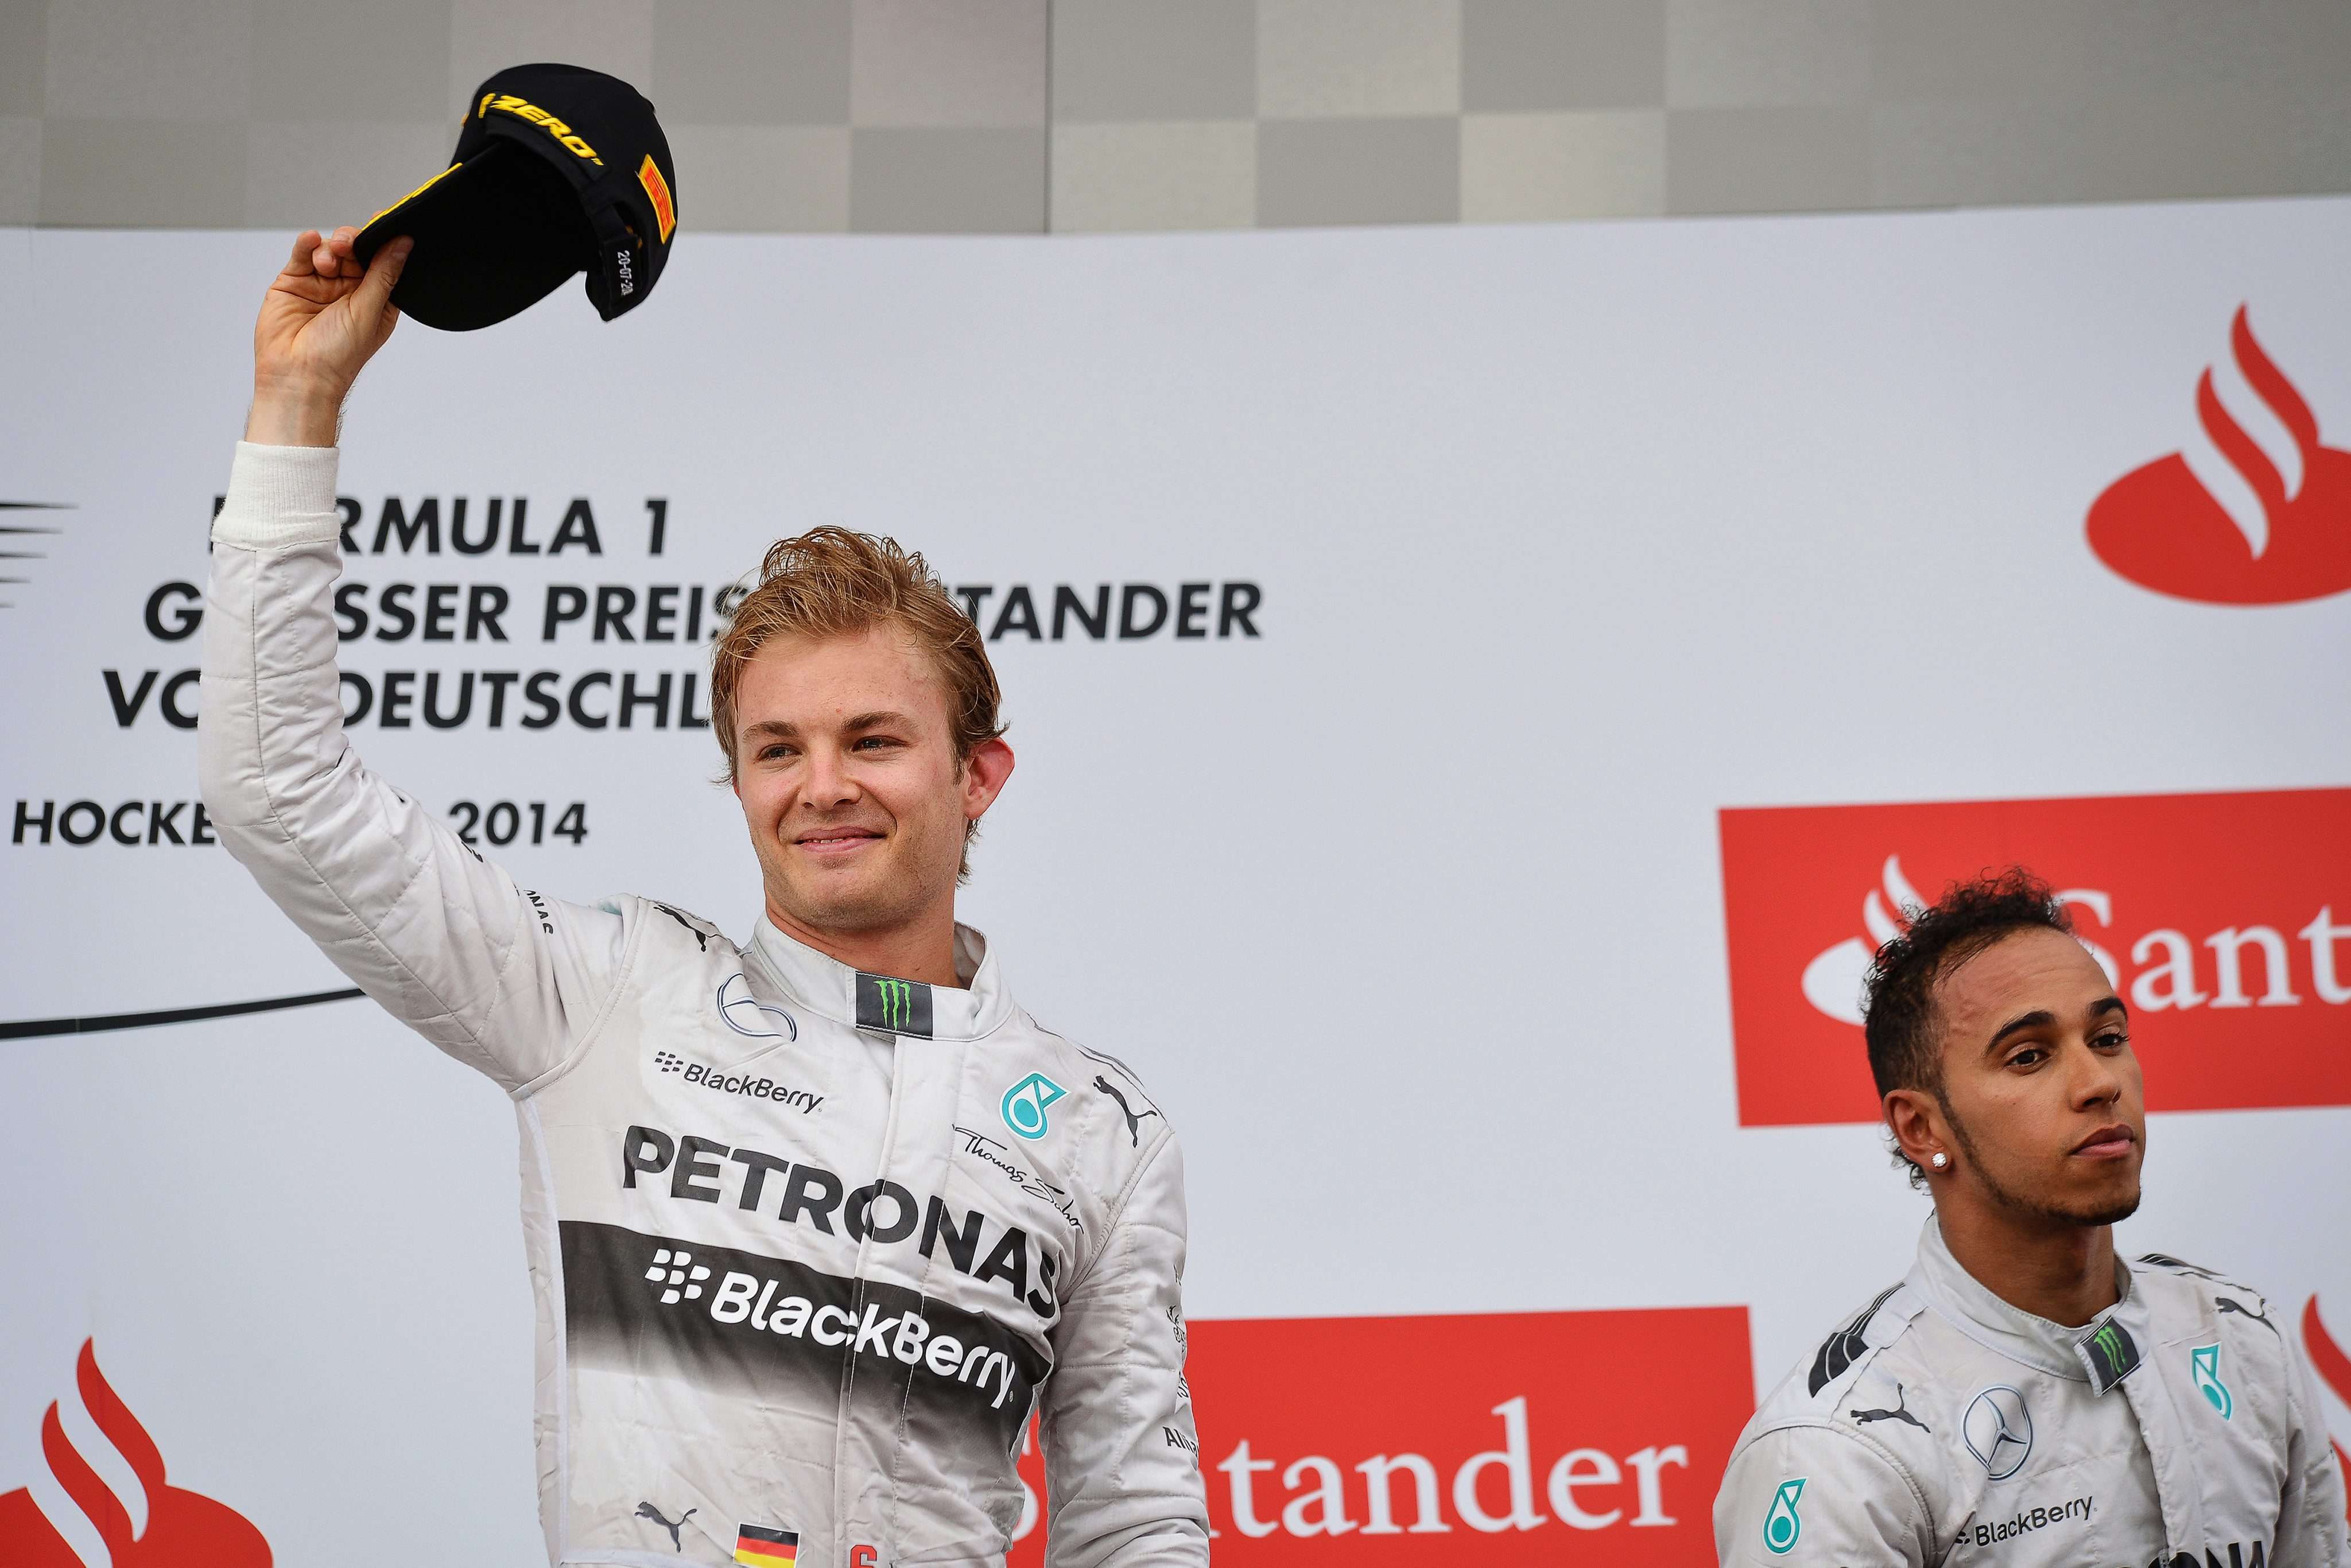 Nico Rosberg won’t get the opportunity to race at his home track as world champion after the German Grand Prix was nixed from the 2017 calendar. Photo: EPA